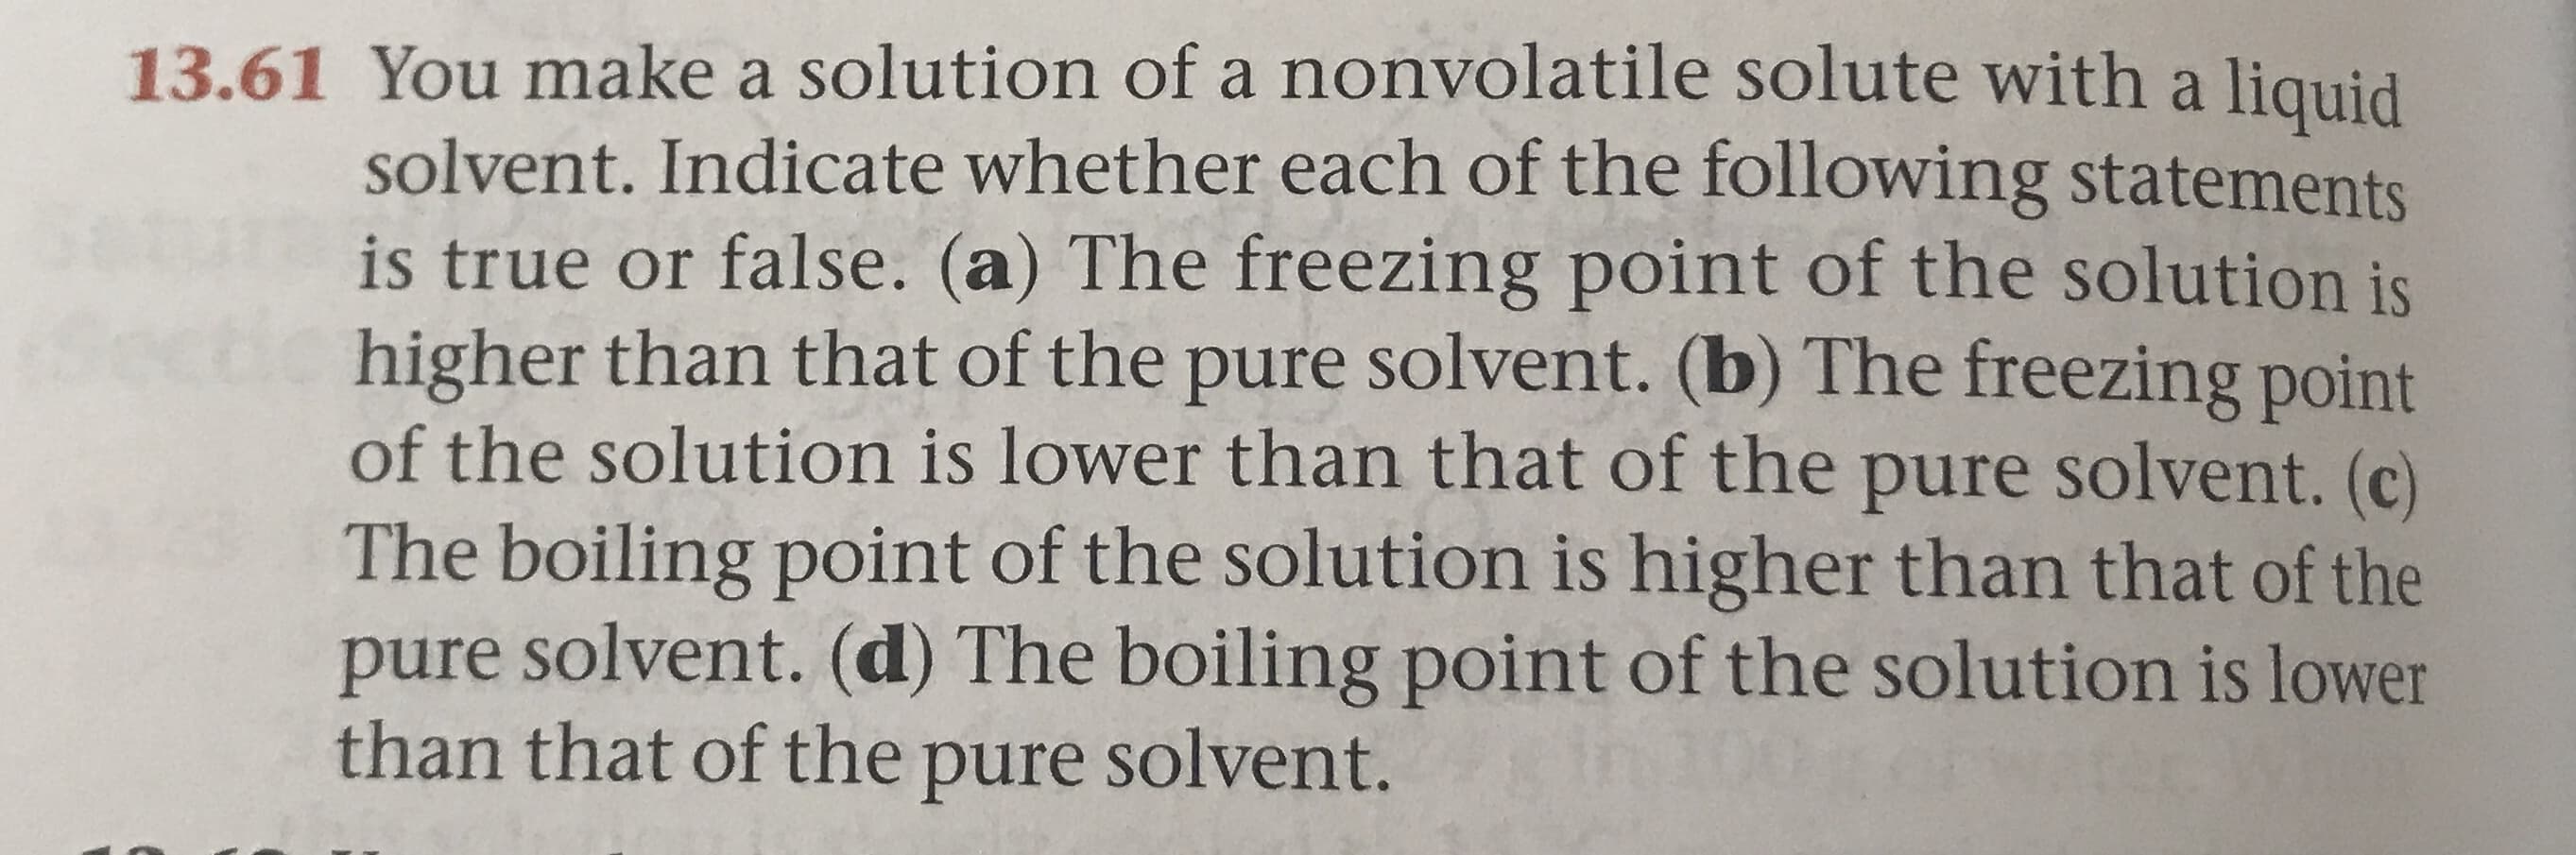 13.61 You make a solution of a nonvolatile solute with a liquid
solvent. Indicate whether each of the following statements
is true or false. (a) The freezing point of the solution is
higher than that of the pure solvent. (b) The freezing point
of the solution is lower than that of the pure solvent. (c)
The boiling point of the solution is higher than that of the
pure solvent. (d) The boiling point of the solution is lower
than that of the pure solvent.
